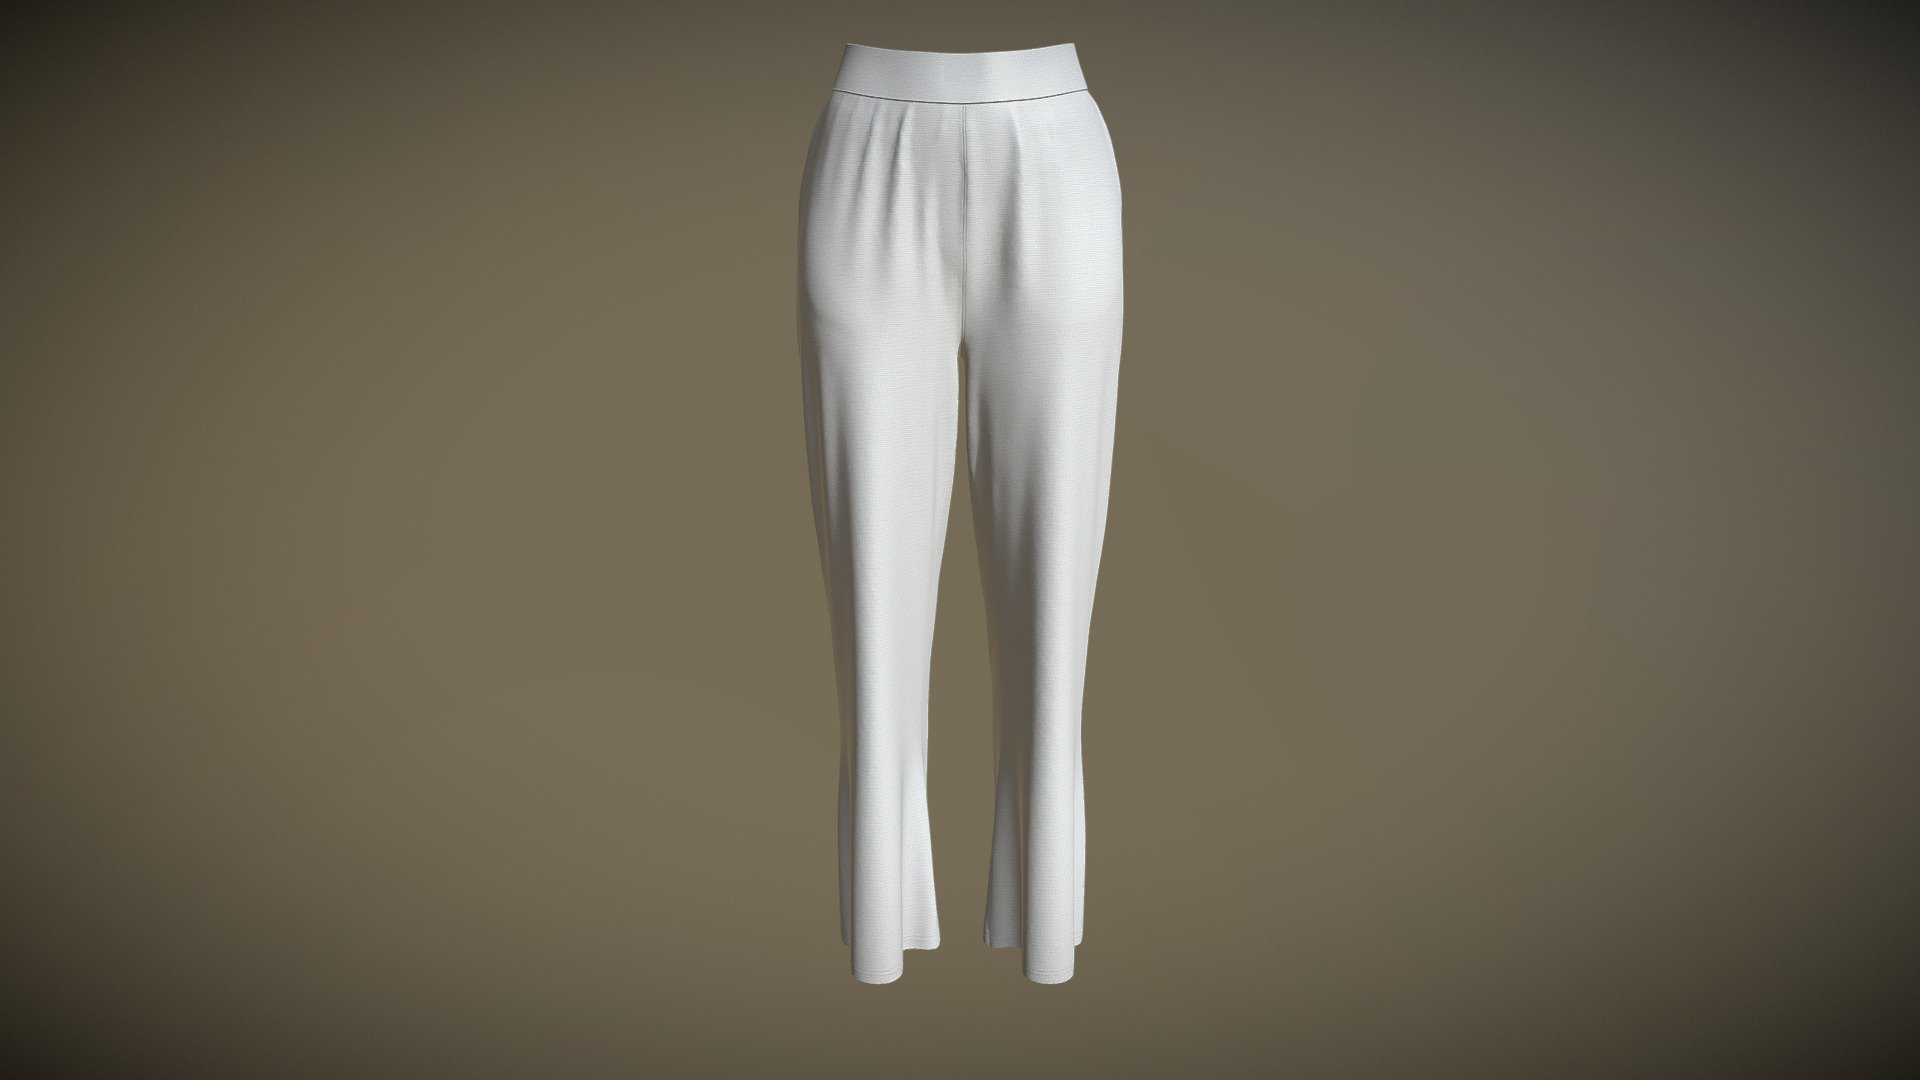 Cloth Title = Women Stretch Bell Bottom Trousers Gypsy Wide Leg Loose Palazzo Pants 

SKU = DG100122 

Category = Women 

Product Type = Palazzo 

Cloth Length = Long 

Body Fit = Loose Fit 

Occasion = Casual  

Waist Rise = High Rise 


Our Services:

3D Apparel Design.

OBJ,FBX,GLTF Making with High/Low Poly.

Fabric Digitalization.

Mockup making.

3D Teck Pack.

Pattern Making.

2D Illustration.

Cloth Animation and 360 Spin Video.


Contact us:- 

Email: info@digitalfashionwear.com 

Website: https://digitalfashionwear.com 


We designed all the types of cloth specially focused on product visualization, e-commerce, fitting, and production. 

We will design: 

T-shirts 

Polo shirts 

Hoodies 

Sweatshirt 

Jackets 

Shirts 

TankTops 

Trousers 

Bras 

Underwear 

Blazer 

Aprons 

Leggings 

and All Fashion items. 





Our goal is to make sure what we provide you, meets your demand 3d model